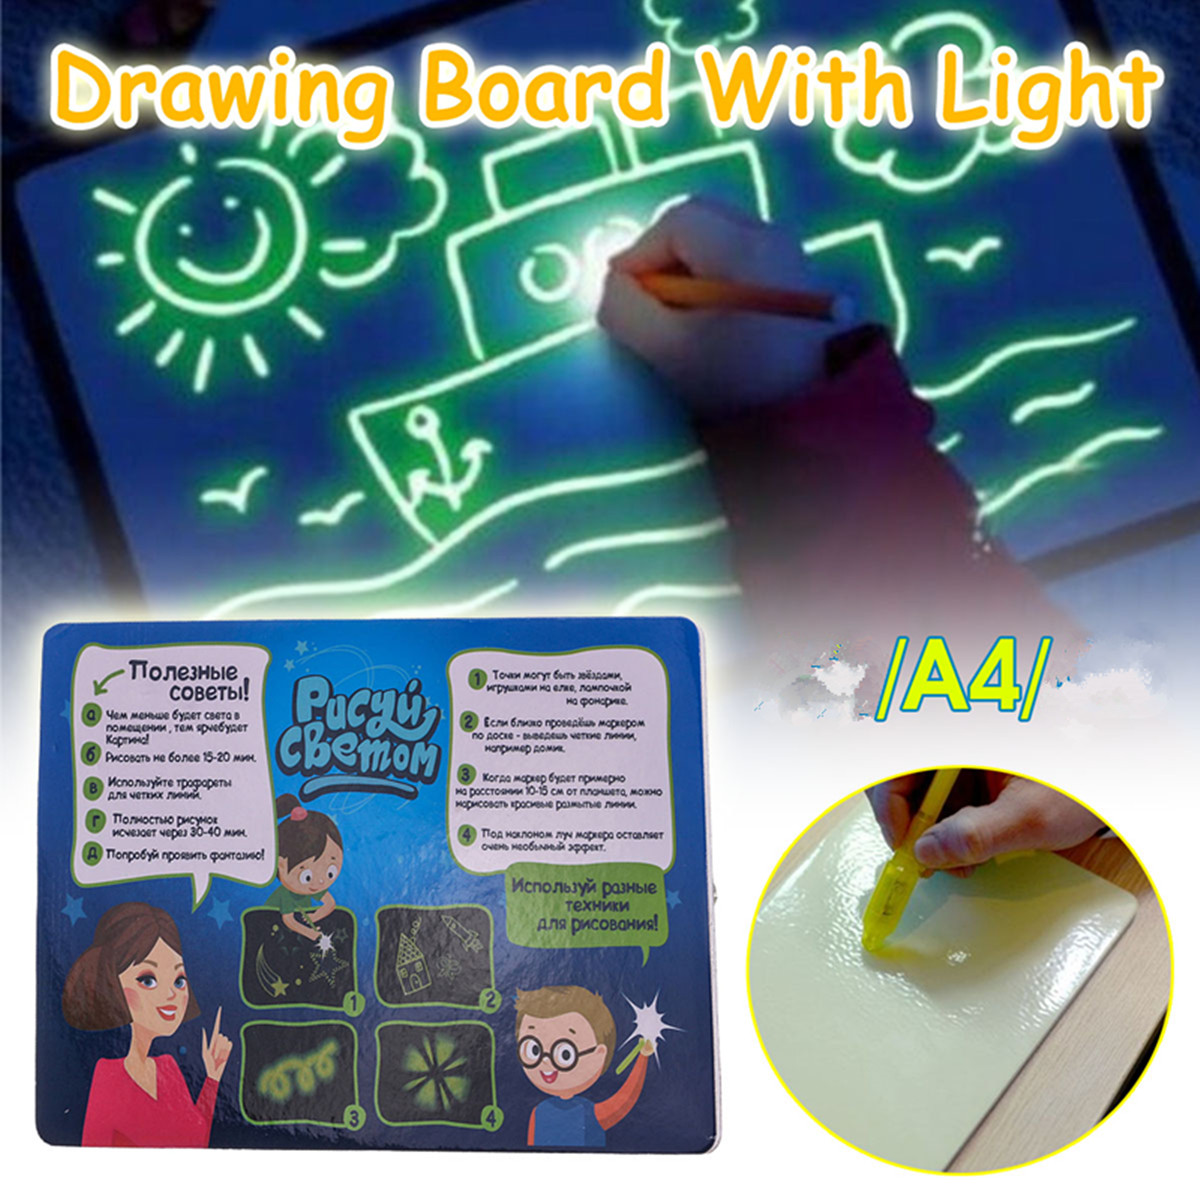 A4-Light-Up-Drawing-Board-Draw-Sketchpad-Board-Children-Kids-Developing-Toy-1676609-1